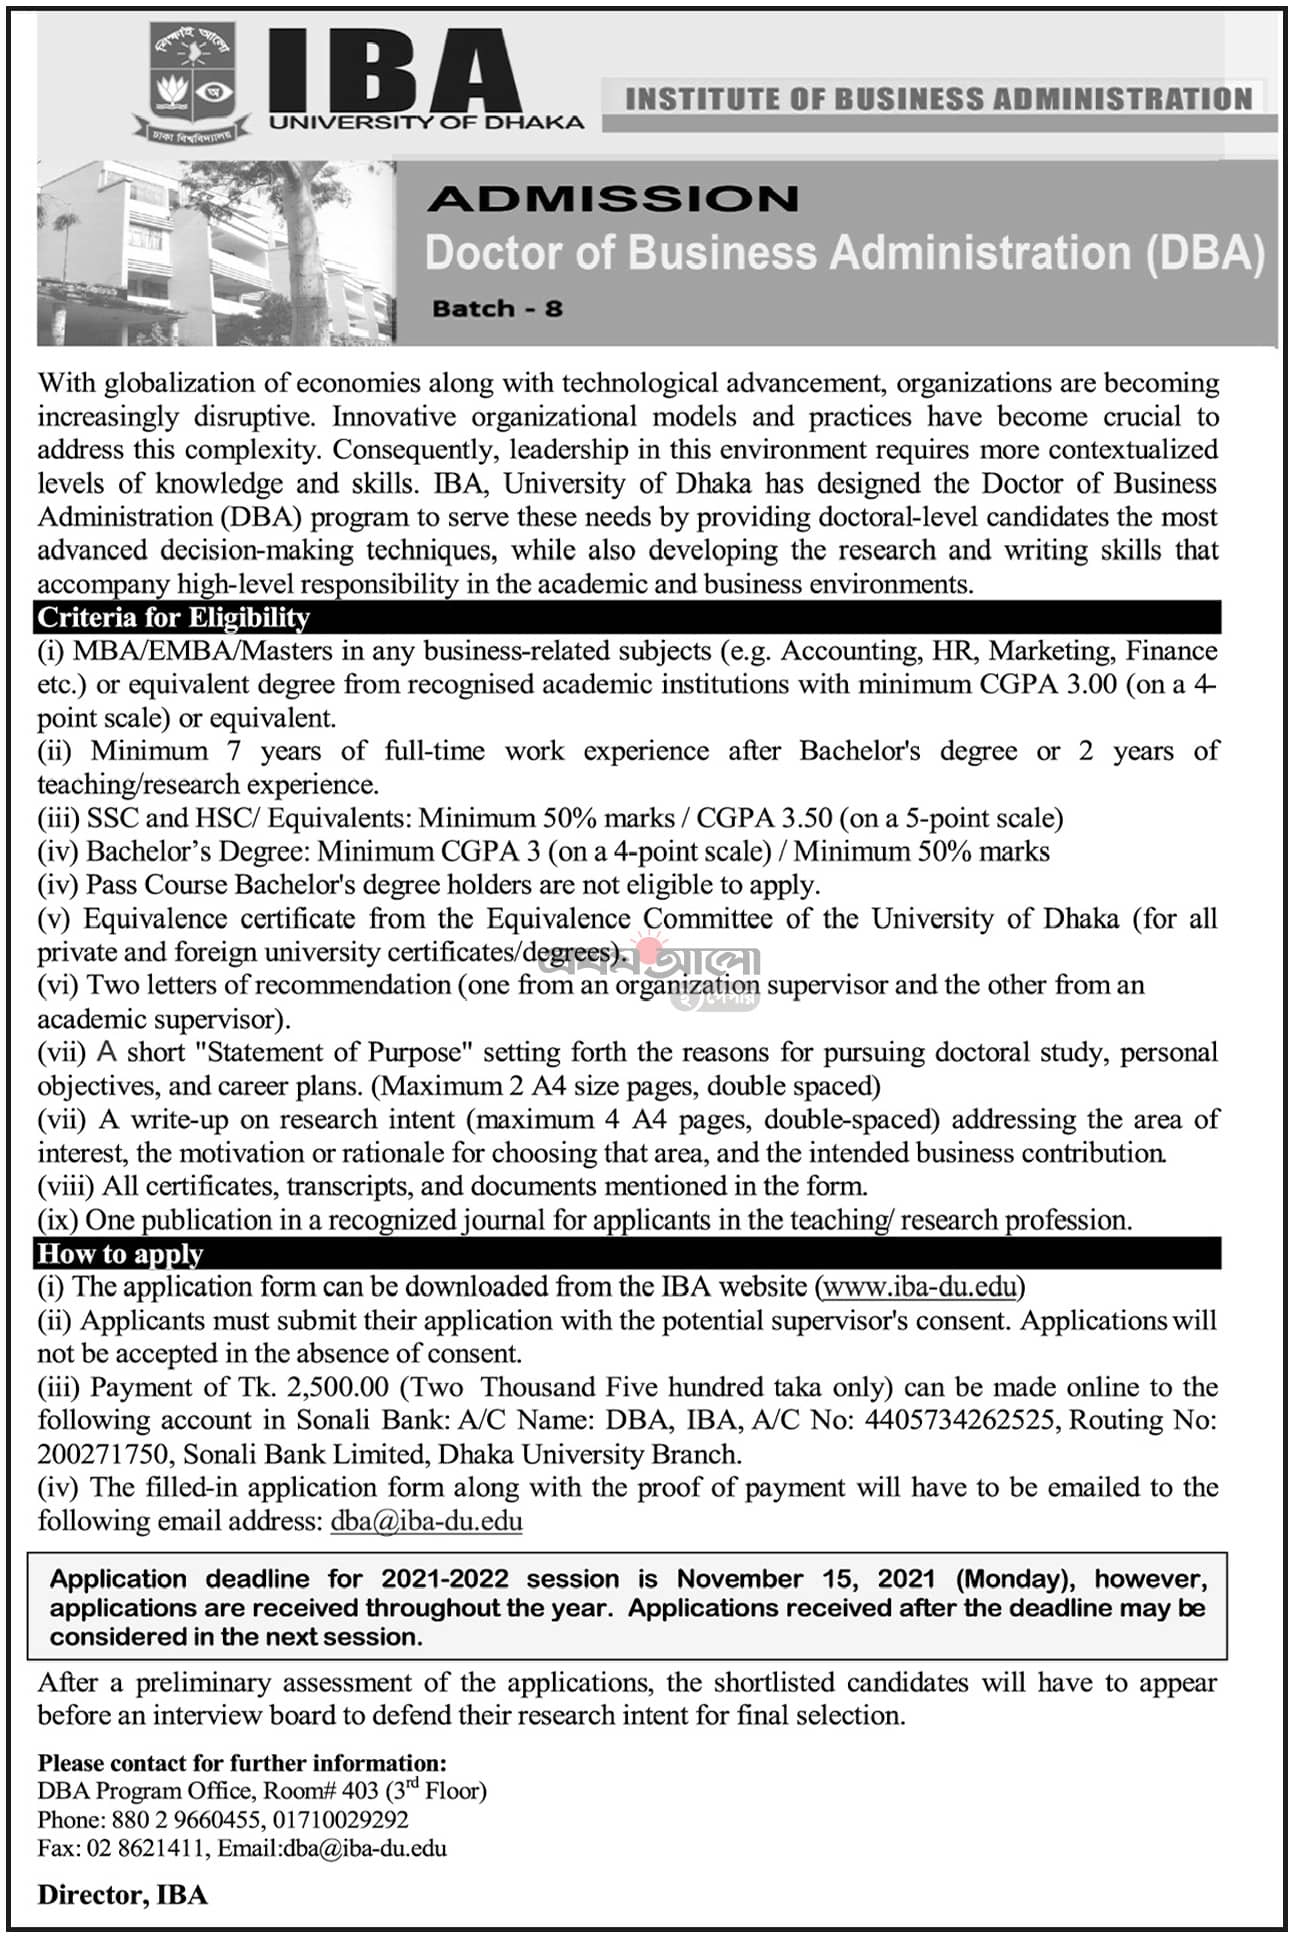 DU admission in DBA (Doctor of Business Administration) in IBA